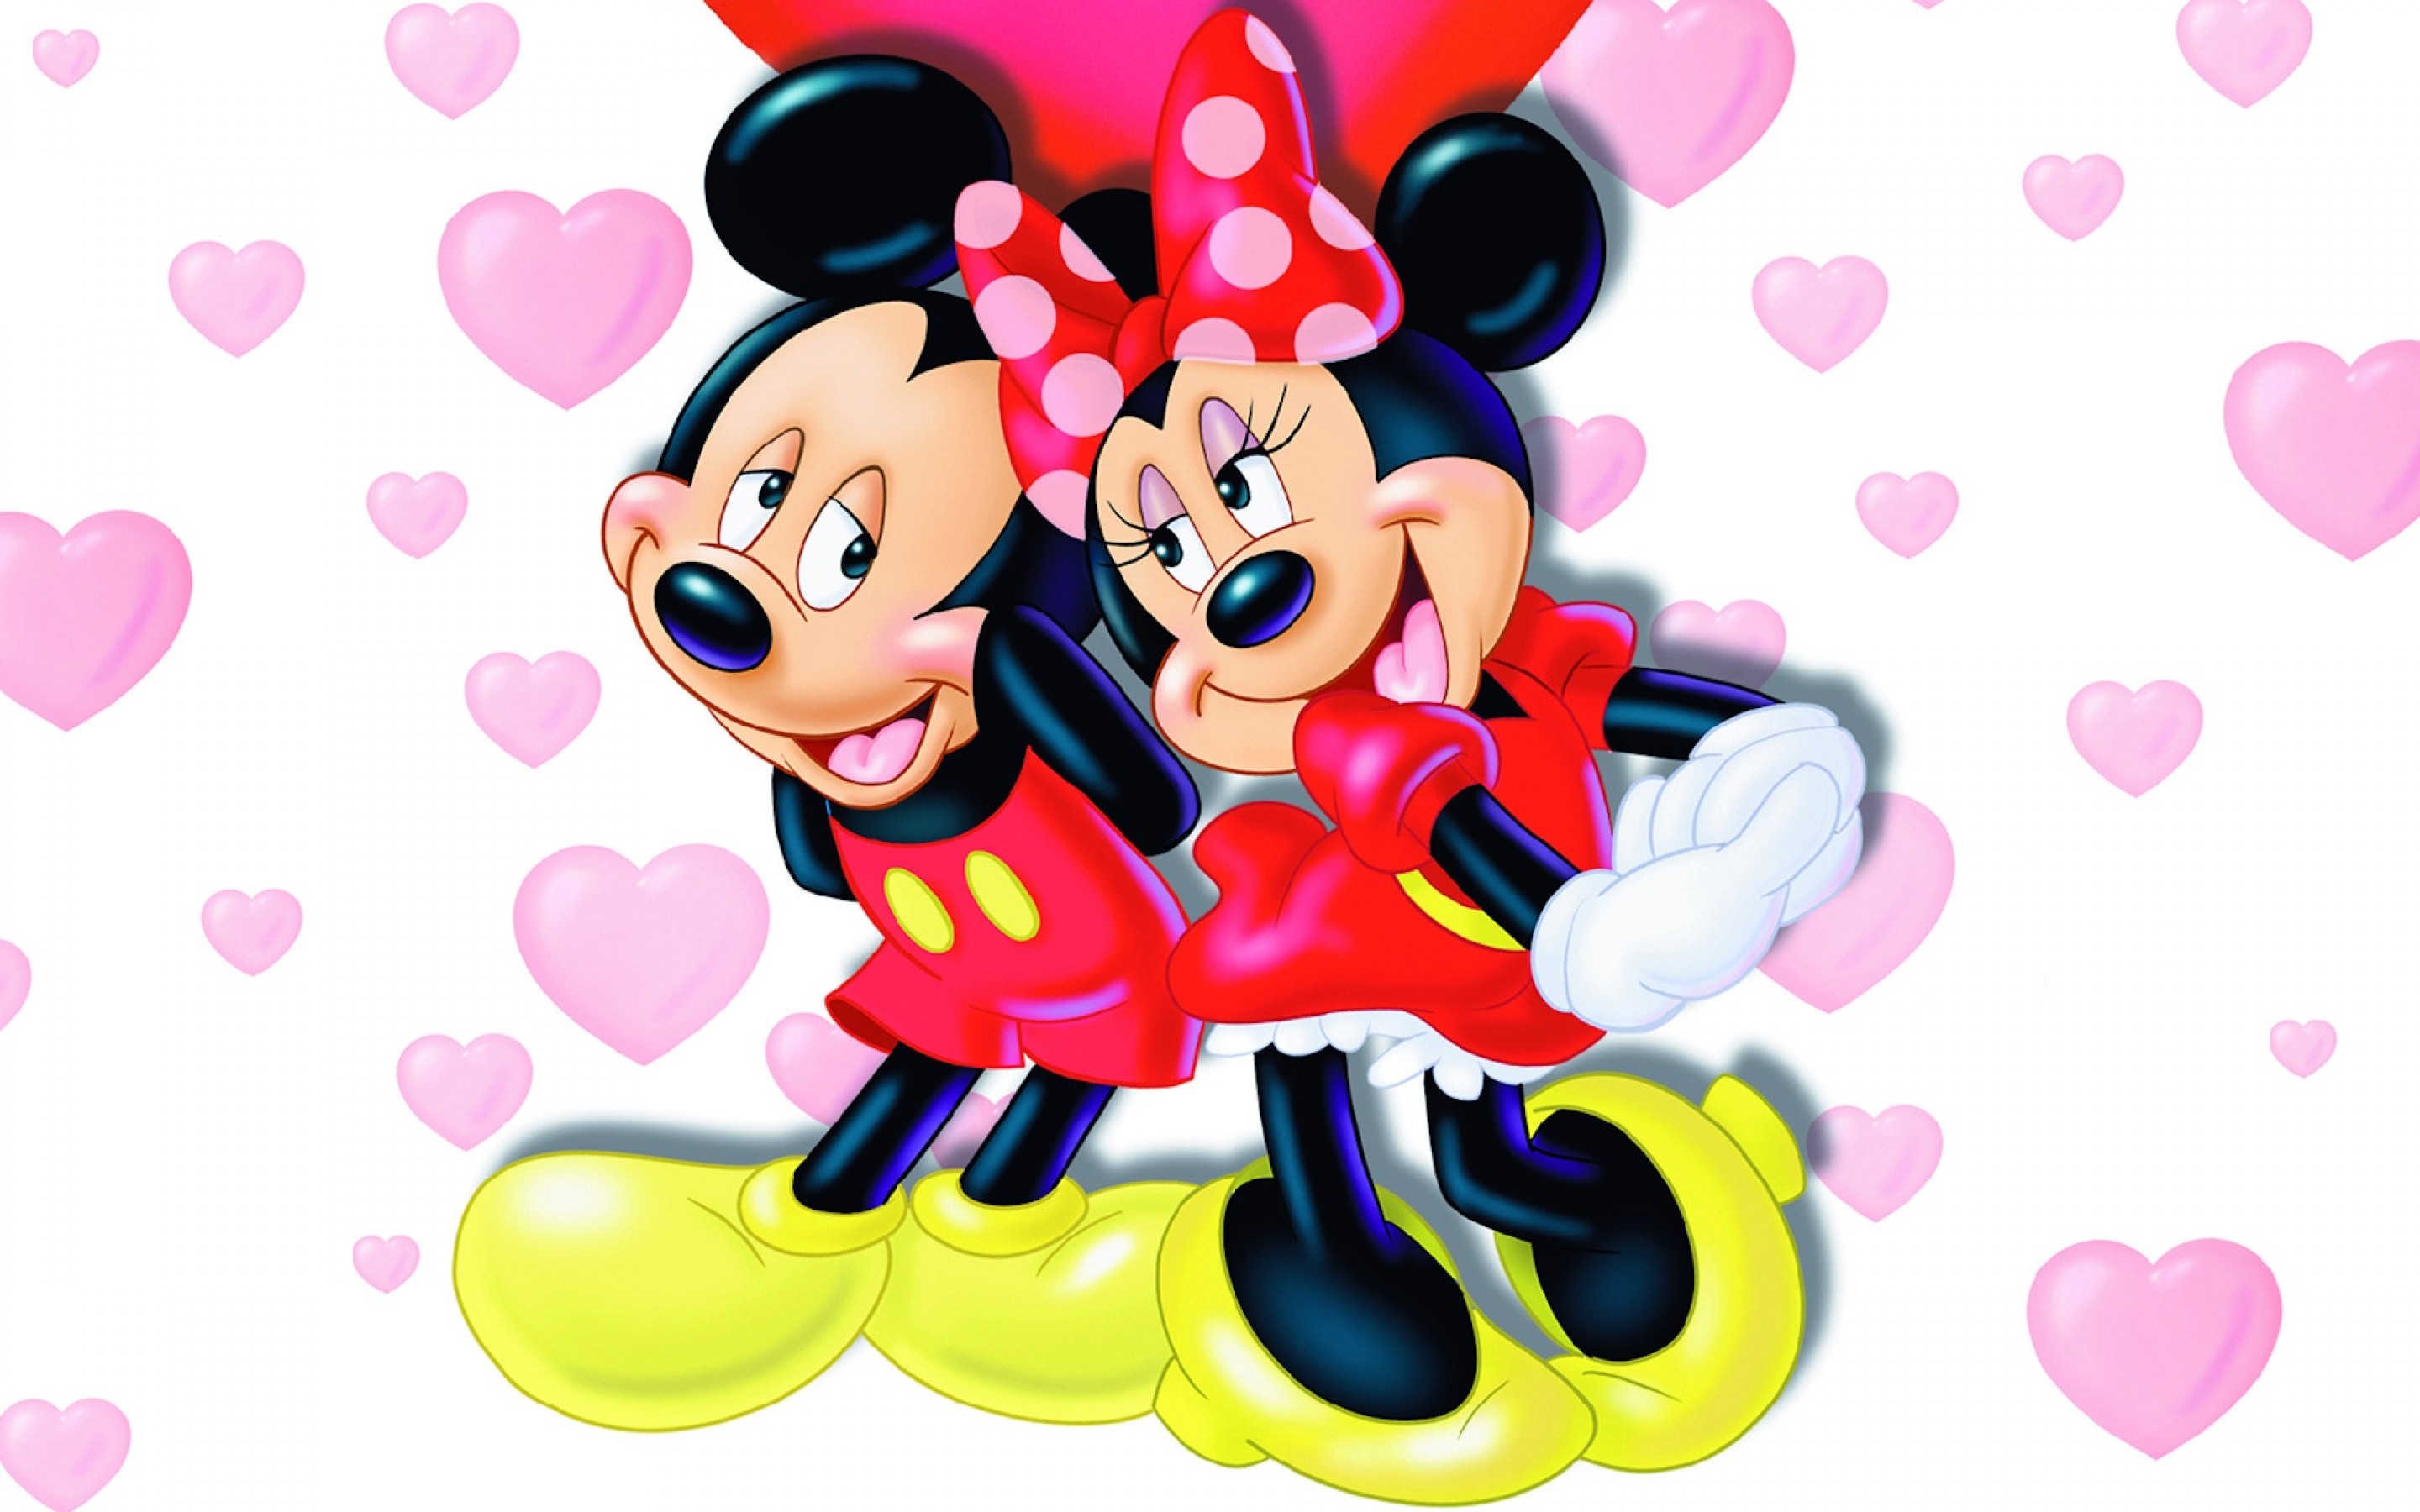 Mickey And Minnie In Love Hd Wallpaper For Mobile Phones And Laptops